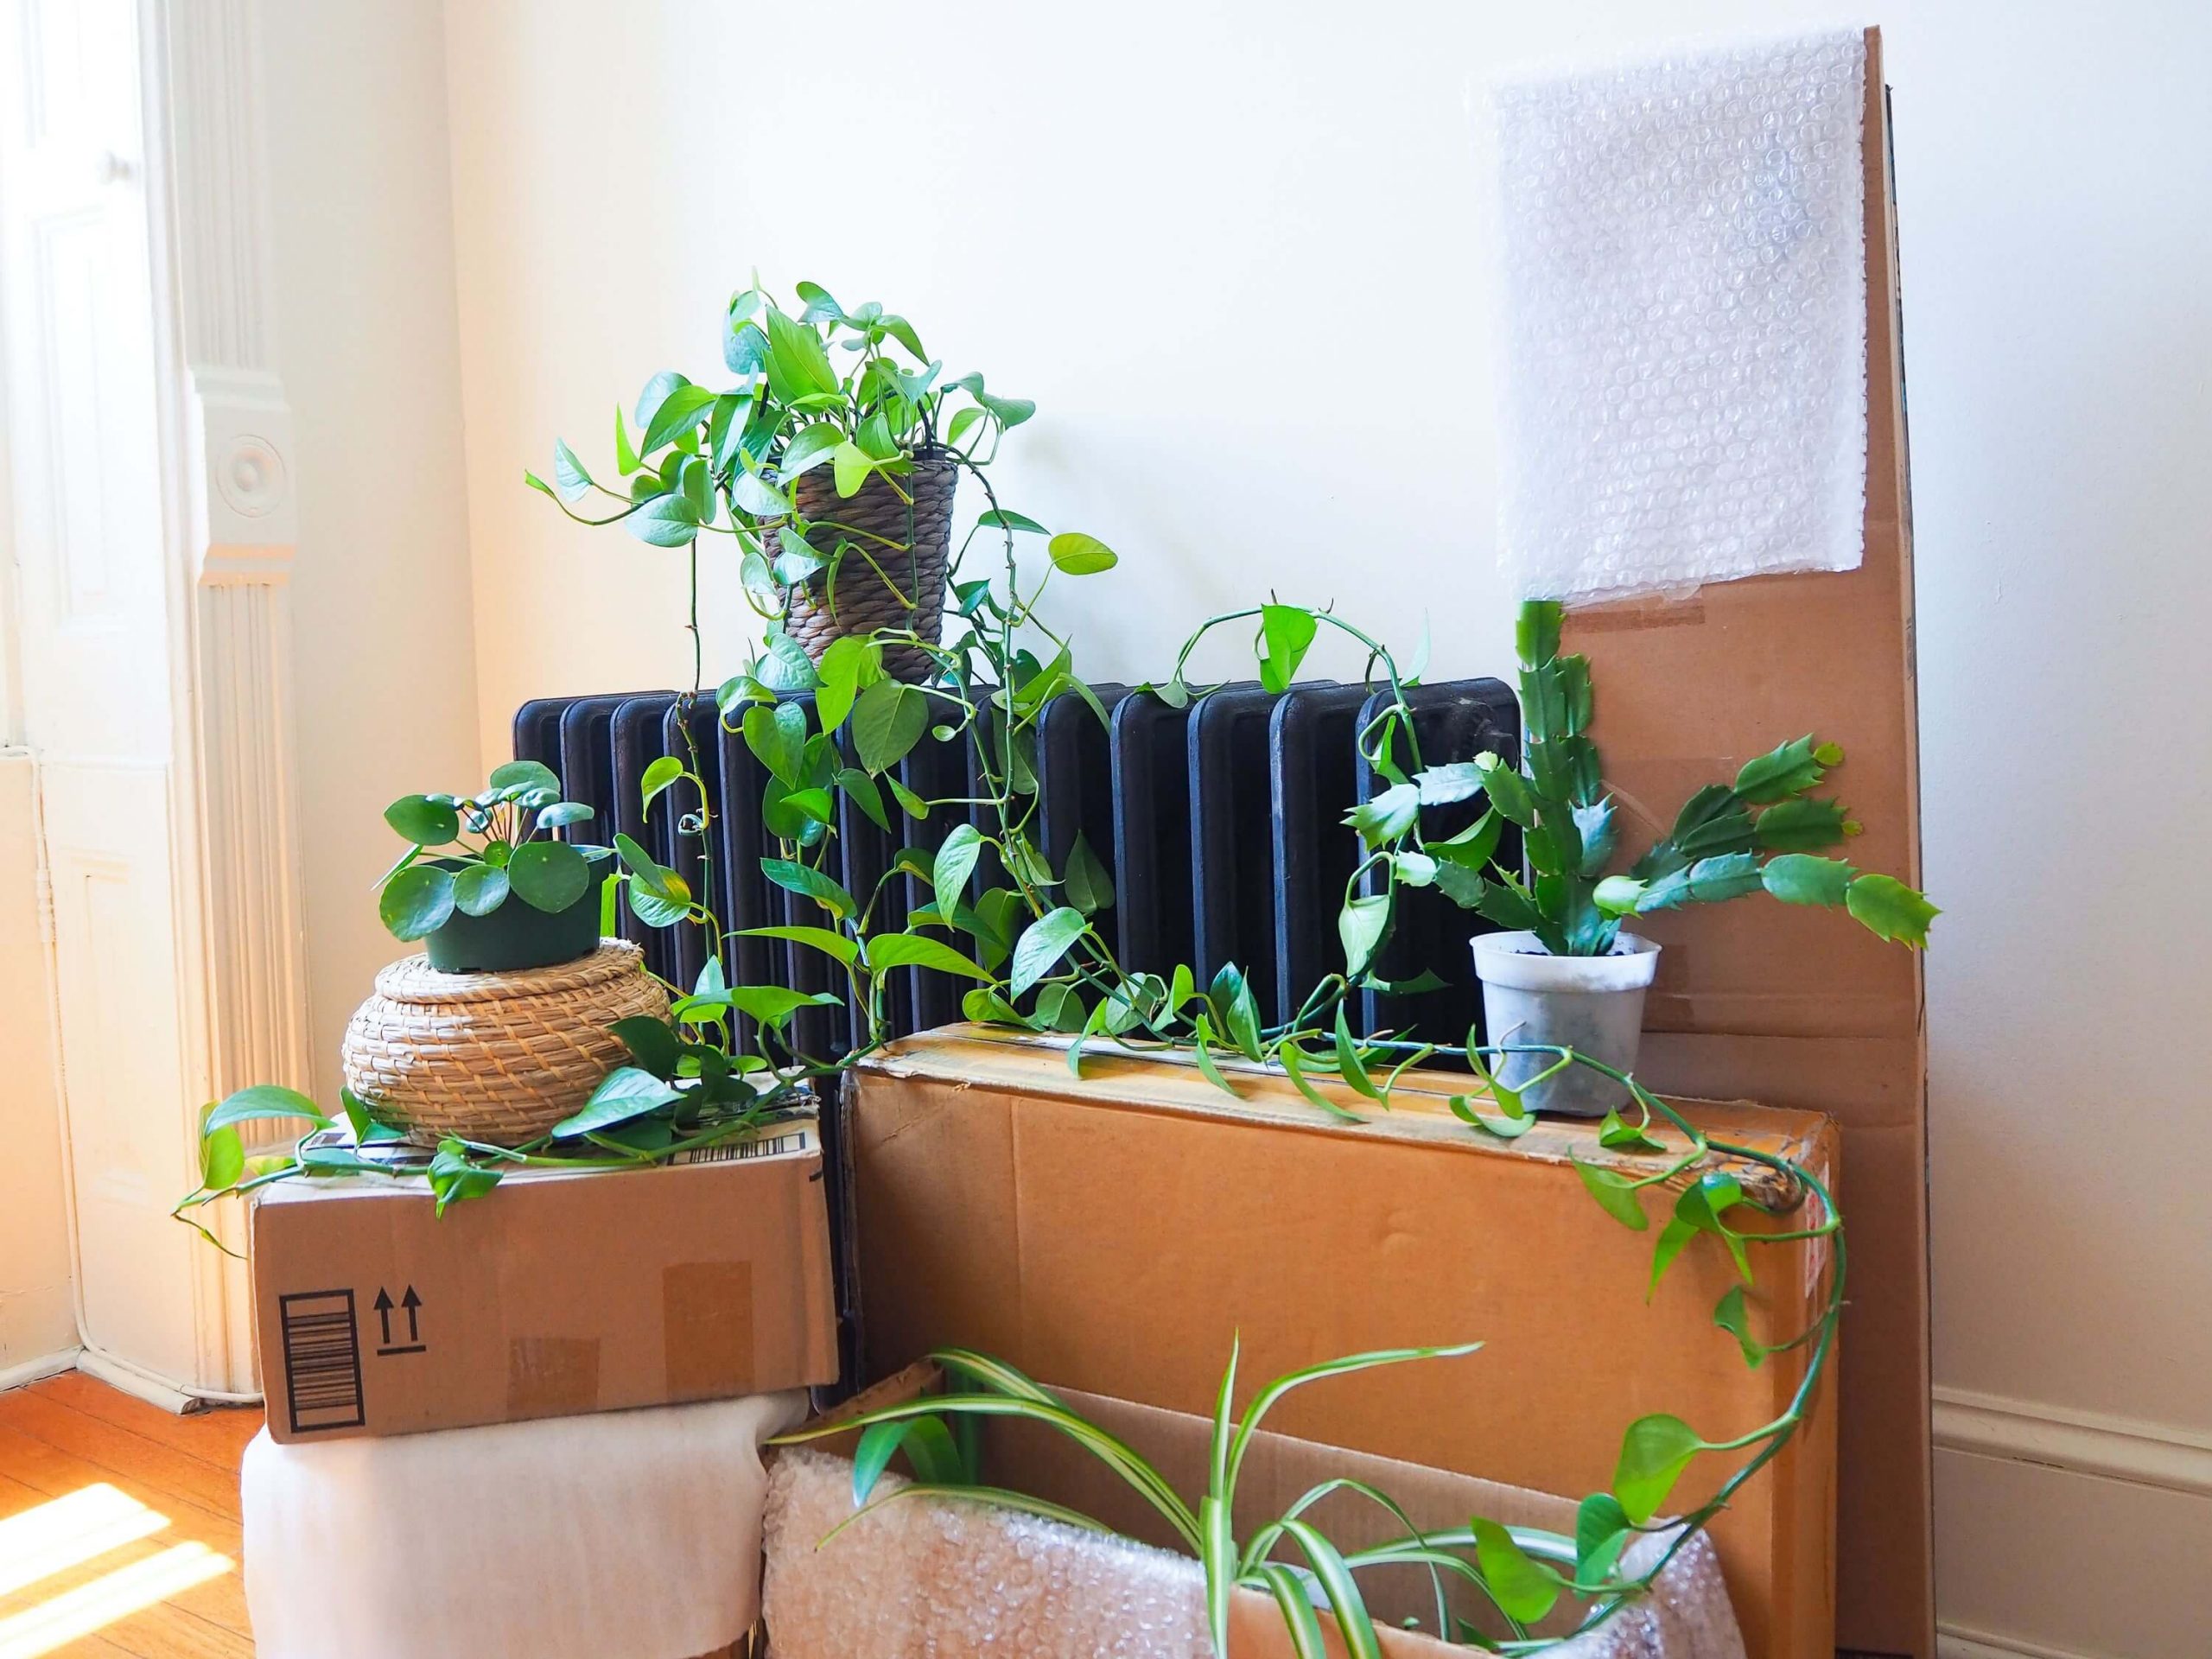 How to Handle Plants Safely When Relocating